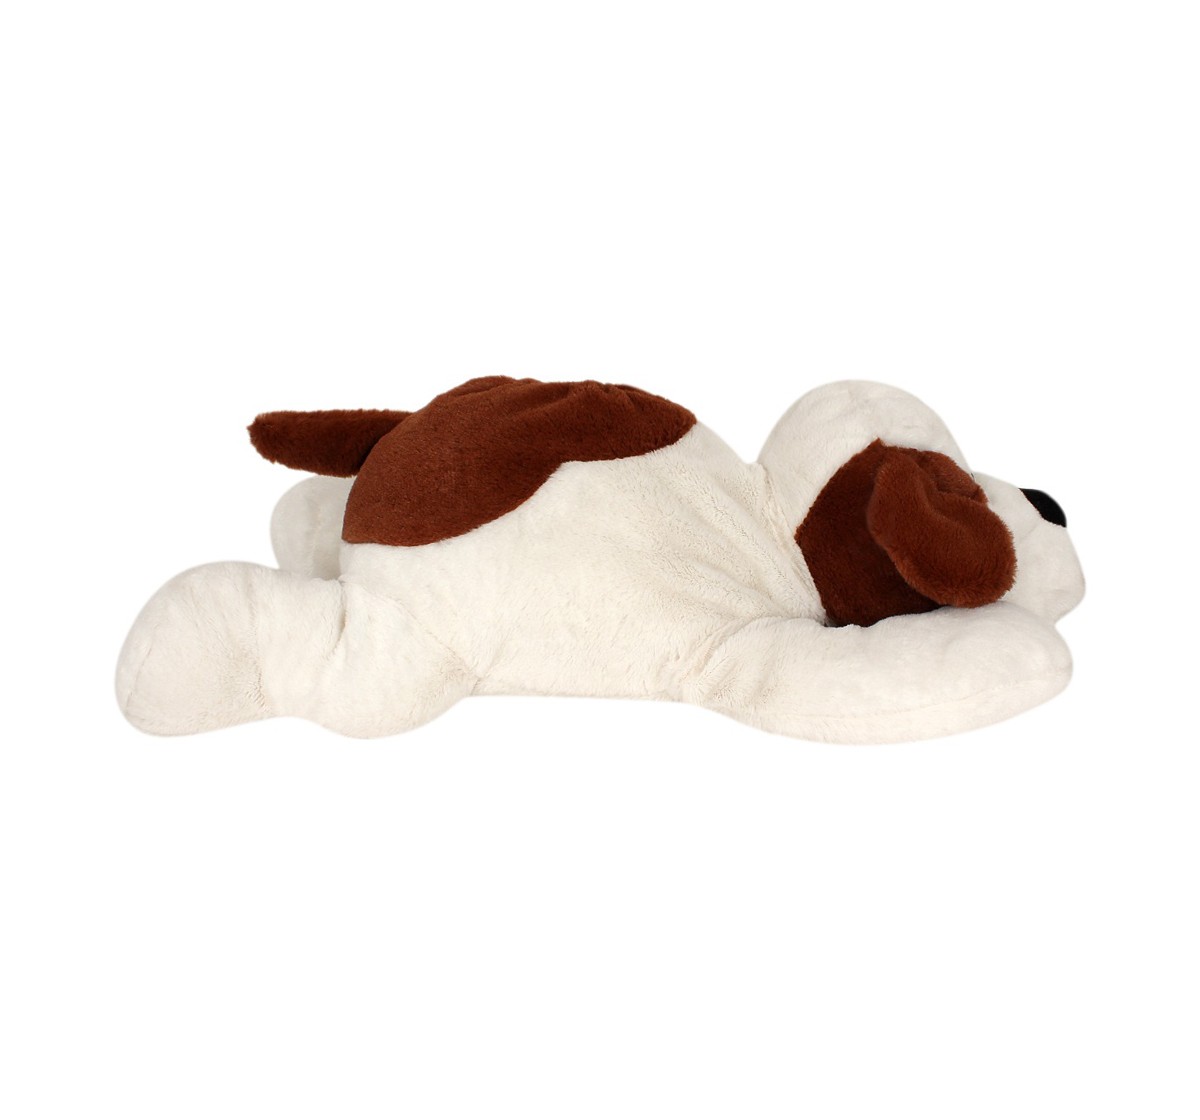 Qingdao Cuddles Laying Dog White And Brown Quirky Soft Toys for Kids age 12M+ - 20 Cm 